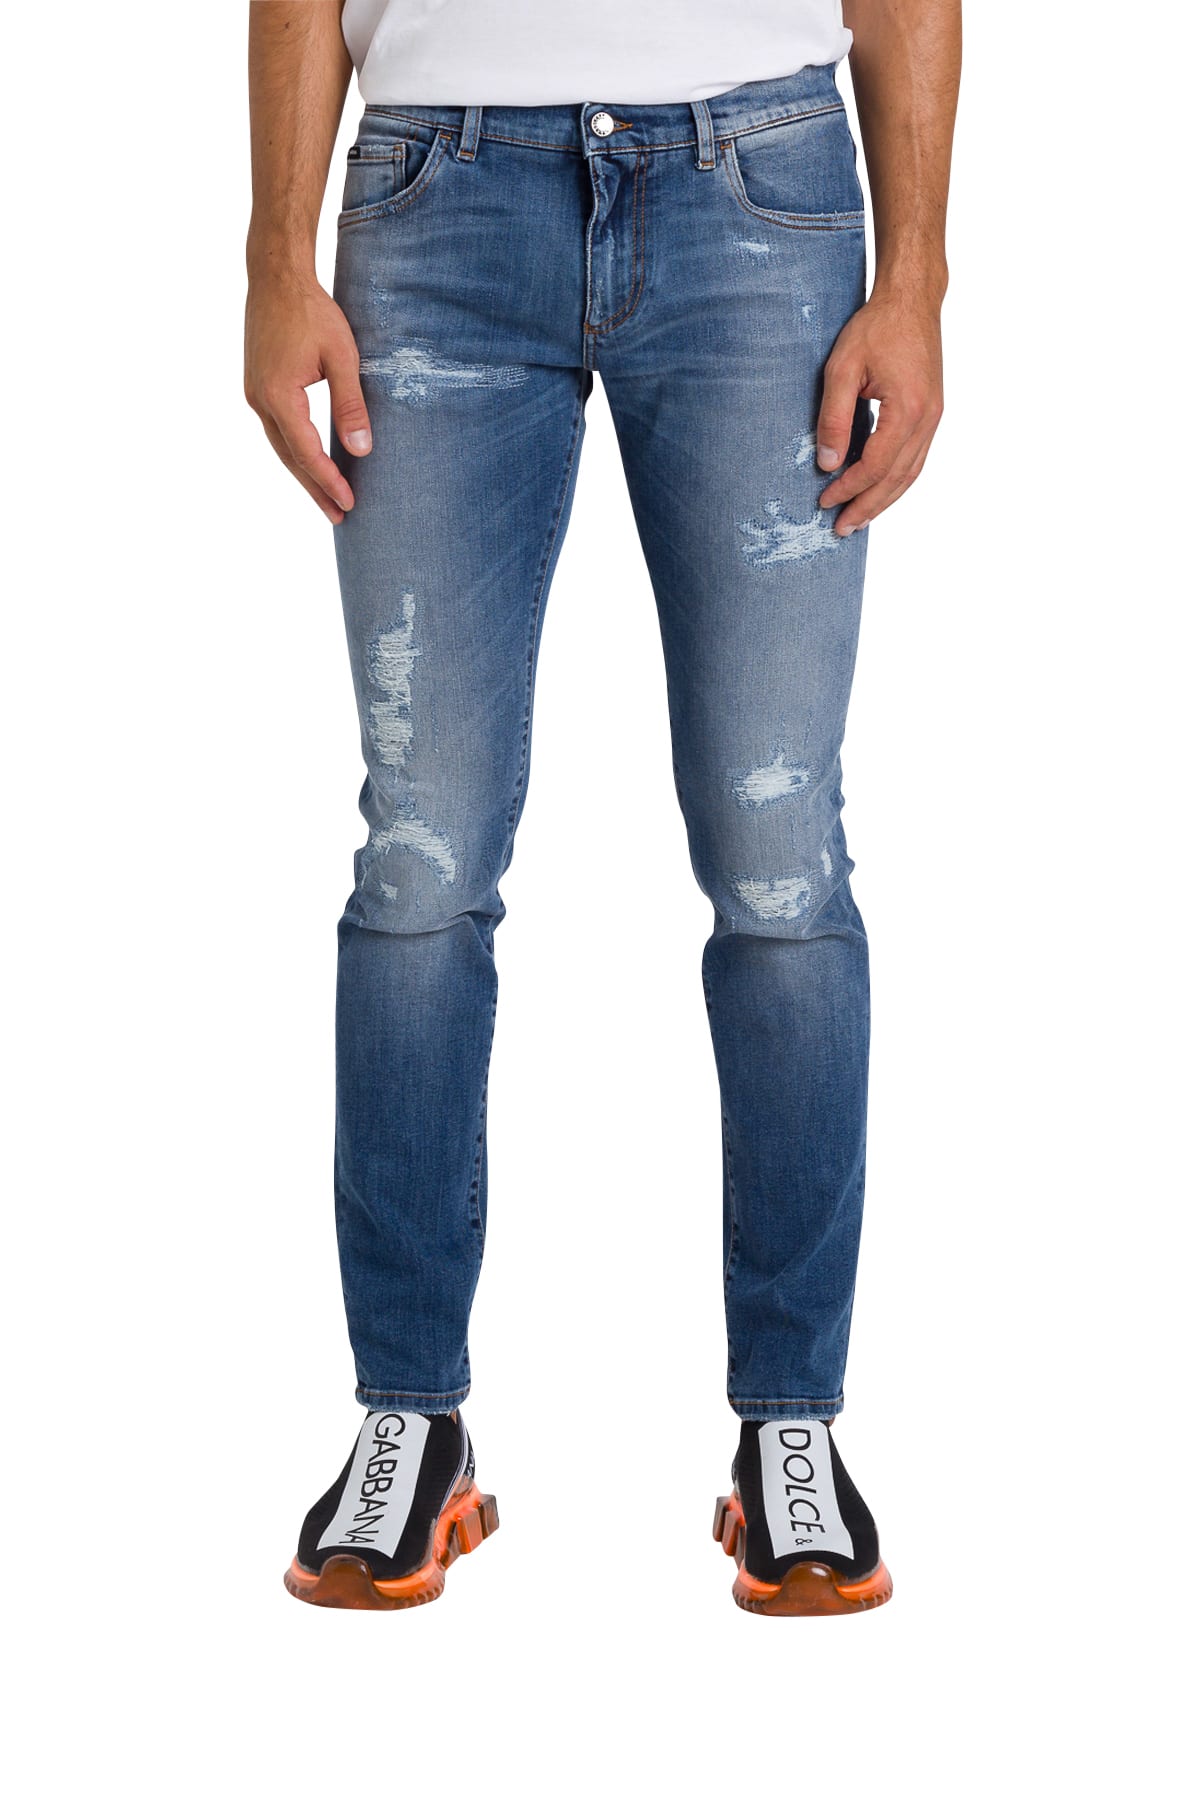 dolce and gabbana jeans price